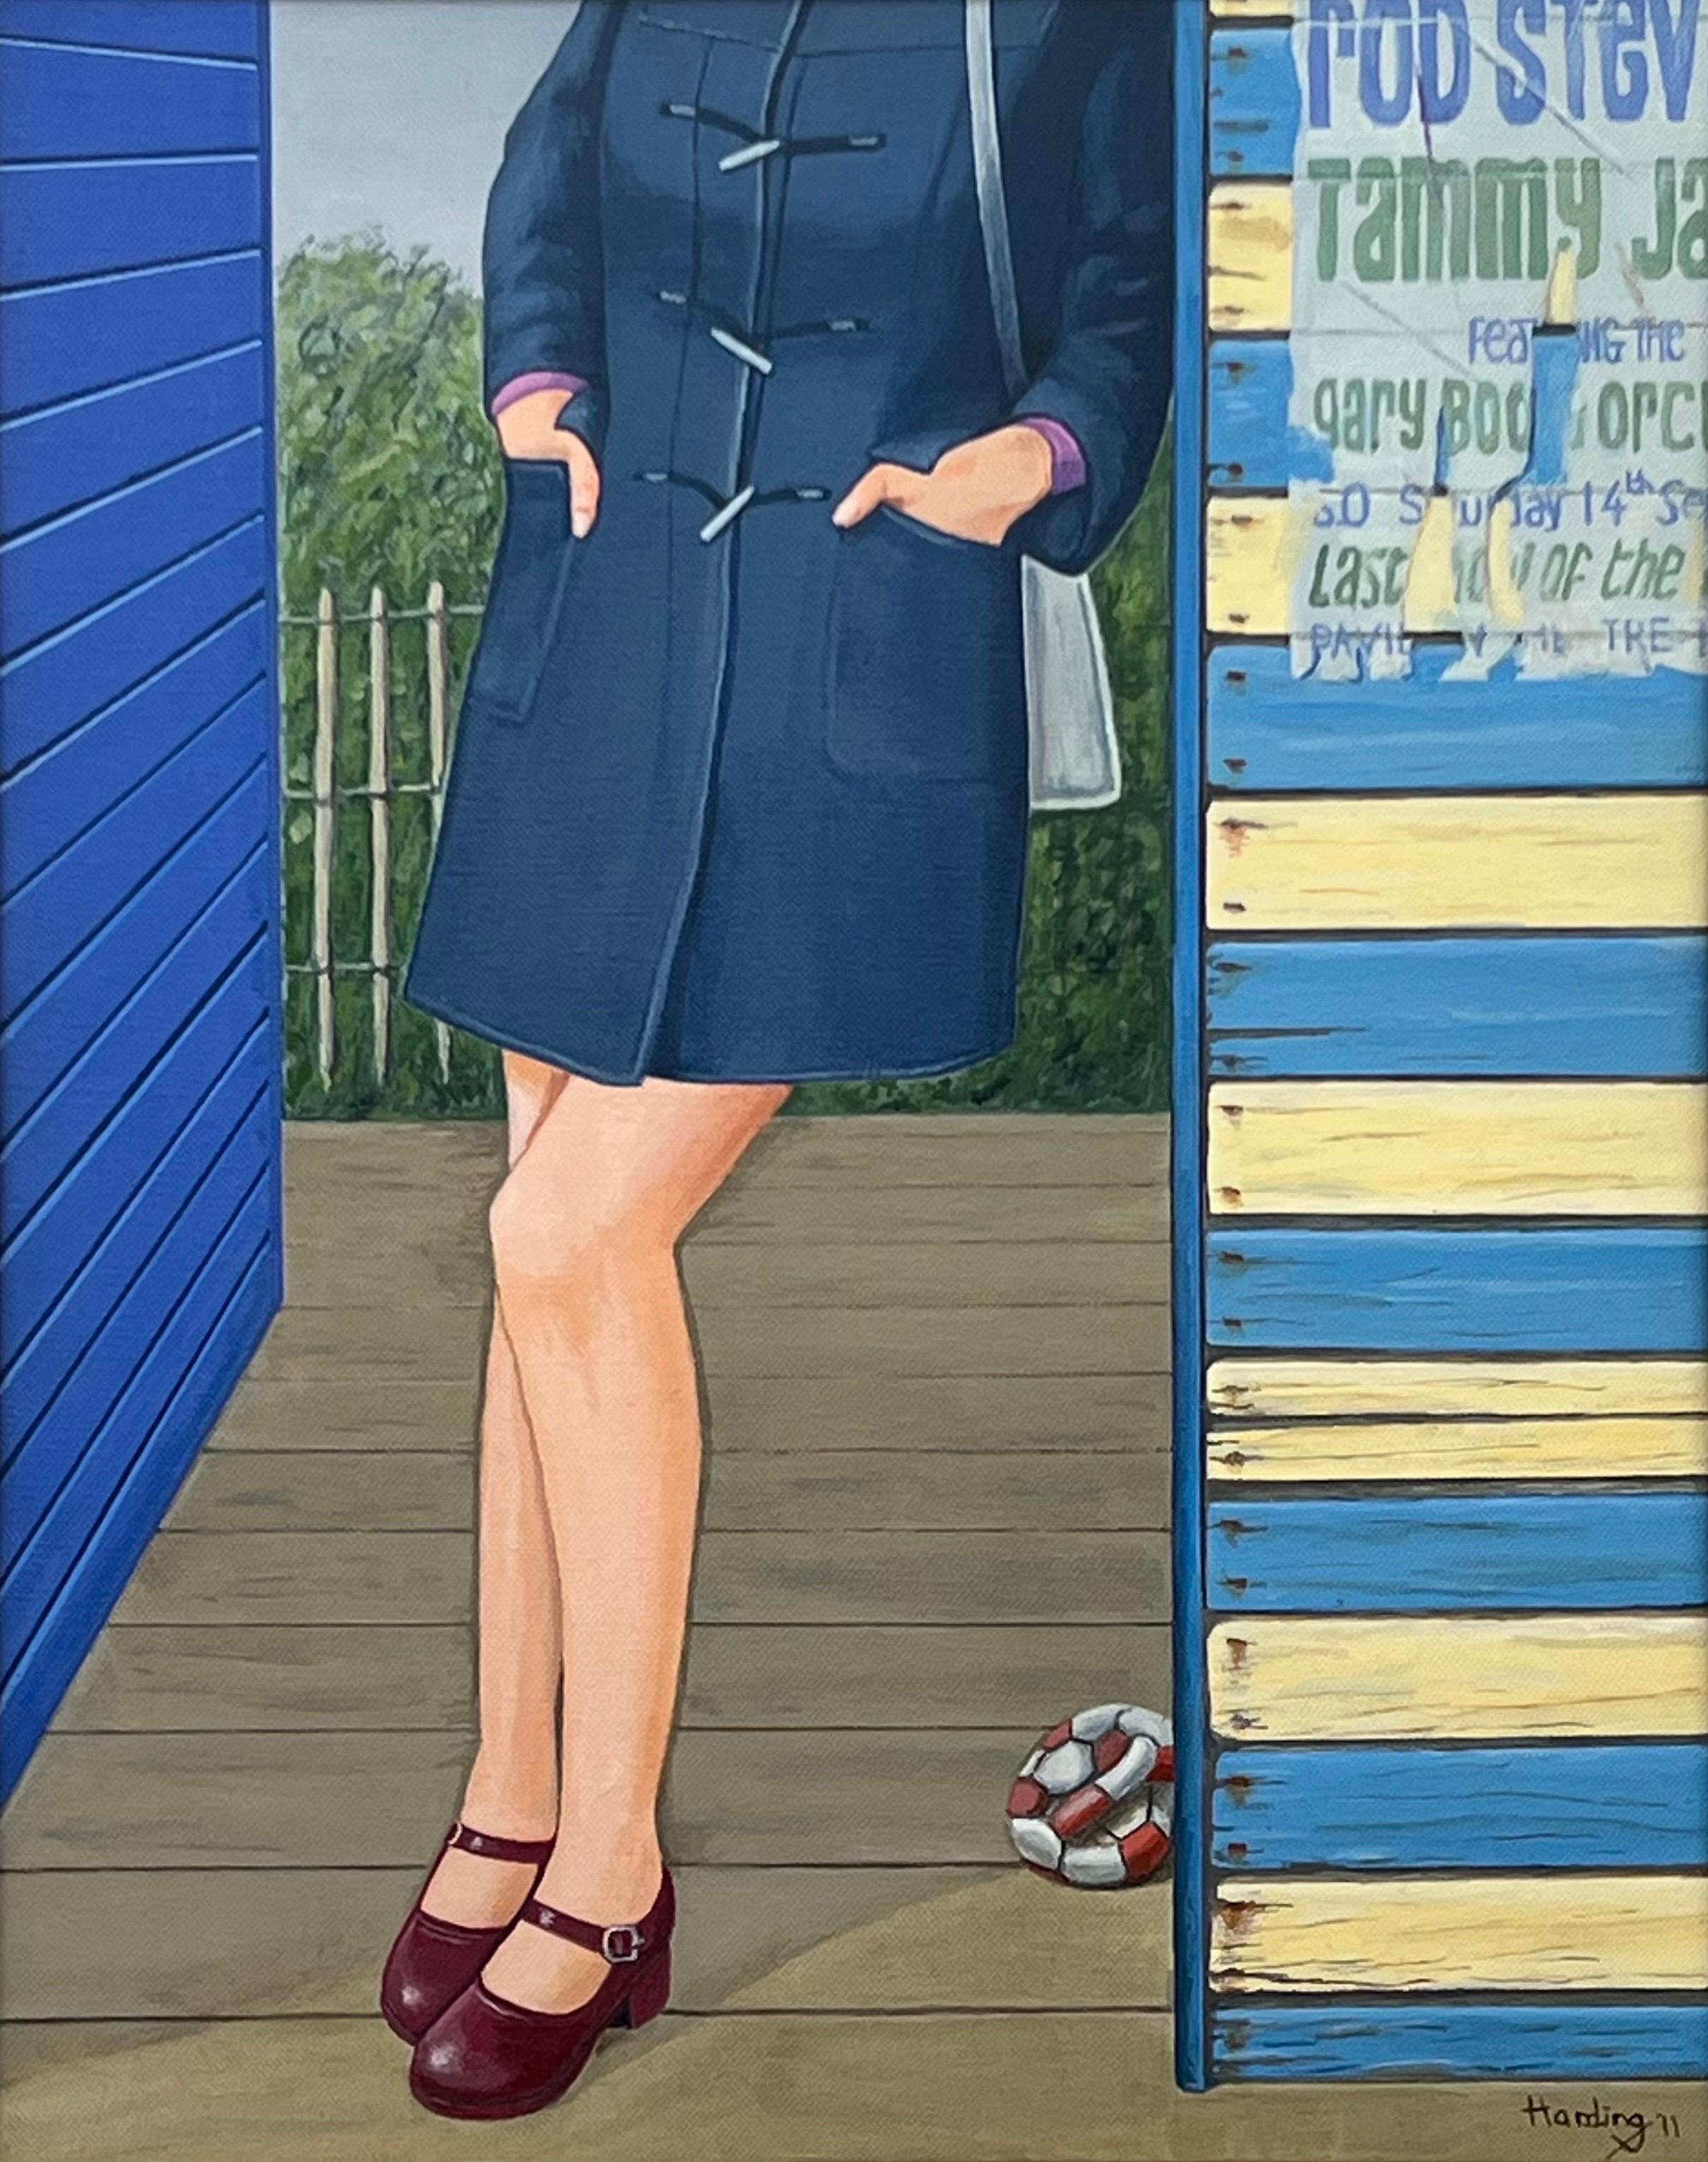 Vintage English Woman with Duffel Coat & Mary Jane Shoes 1960's 1970's England entitled 'The Fall of Desire' by Retro Nostalgic Artist, Paul F Harding. Signed, Original, Oil on Canvas. Presented in a gold frame.

Art measures 16 x 20 inches
Frame